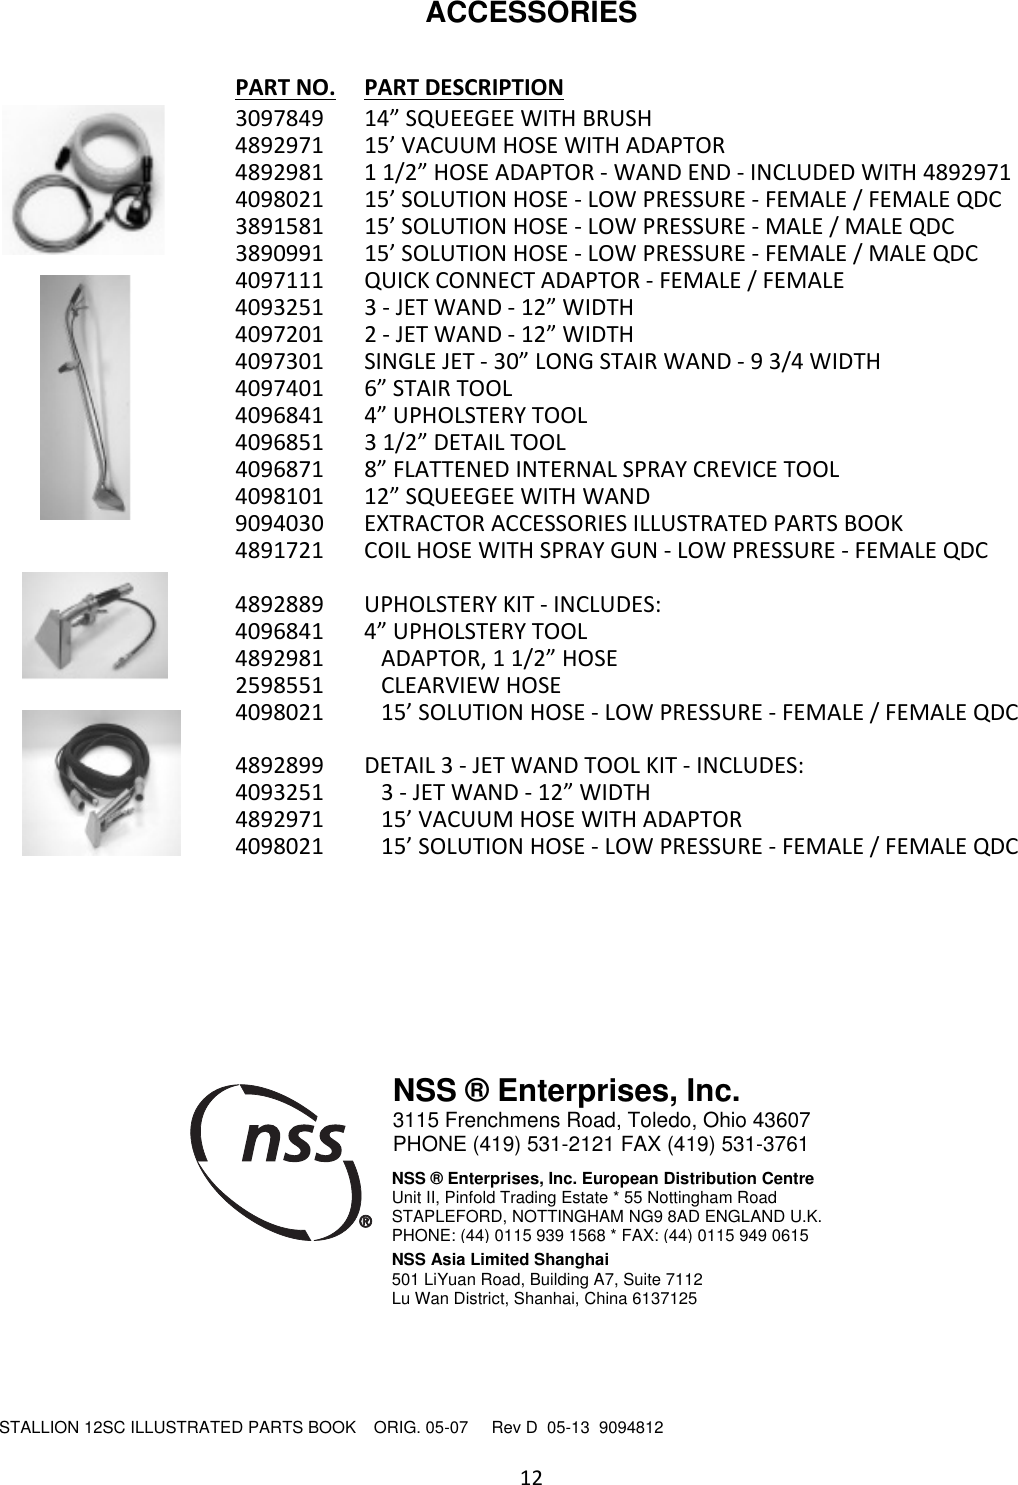 Page 12 of 12 - 9094812 Stallion 12SC Lllustrated Parts Book  Nss-stallion-12sc-carpet-extractor-parts-manual